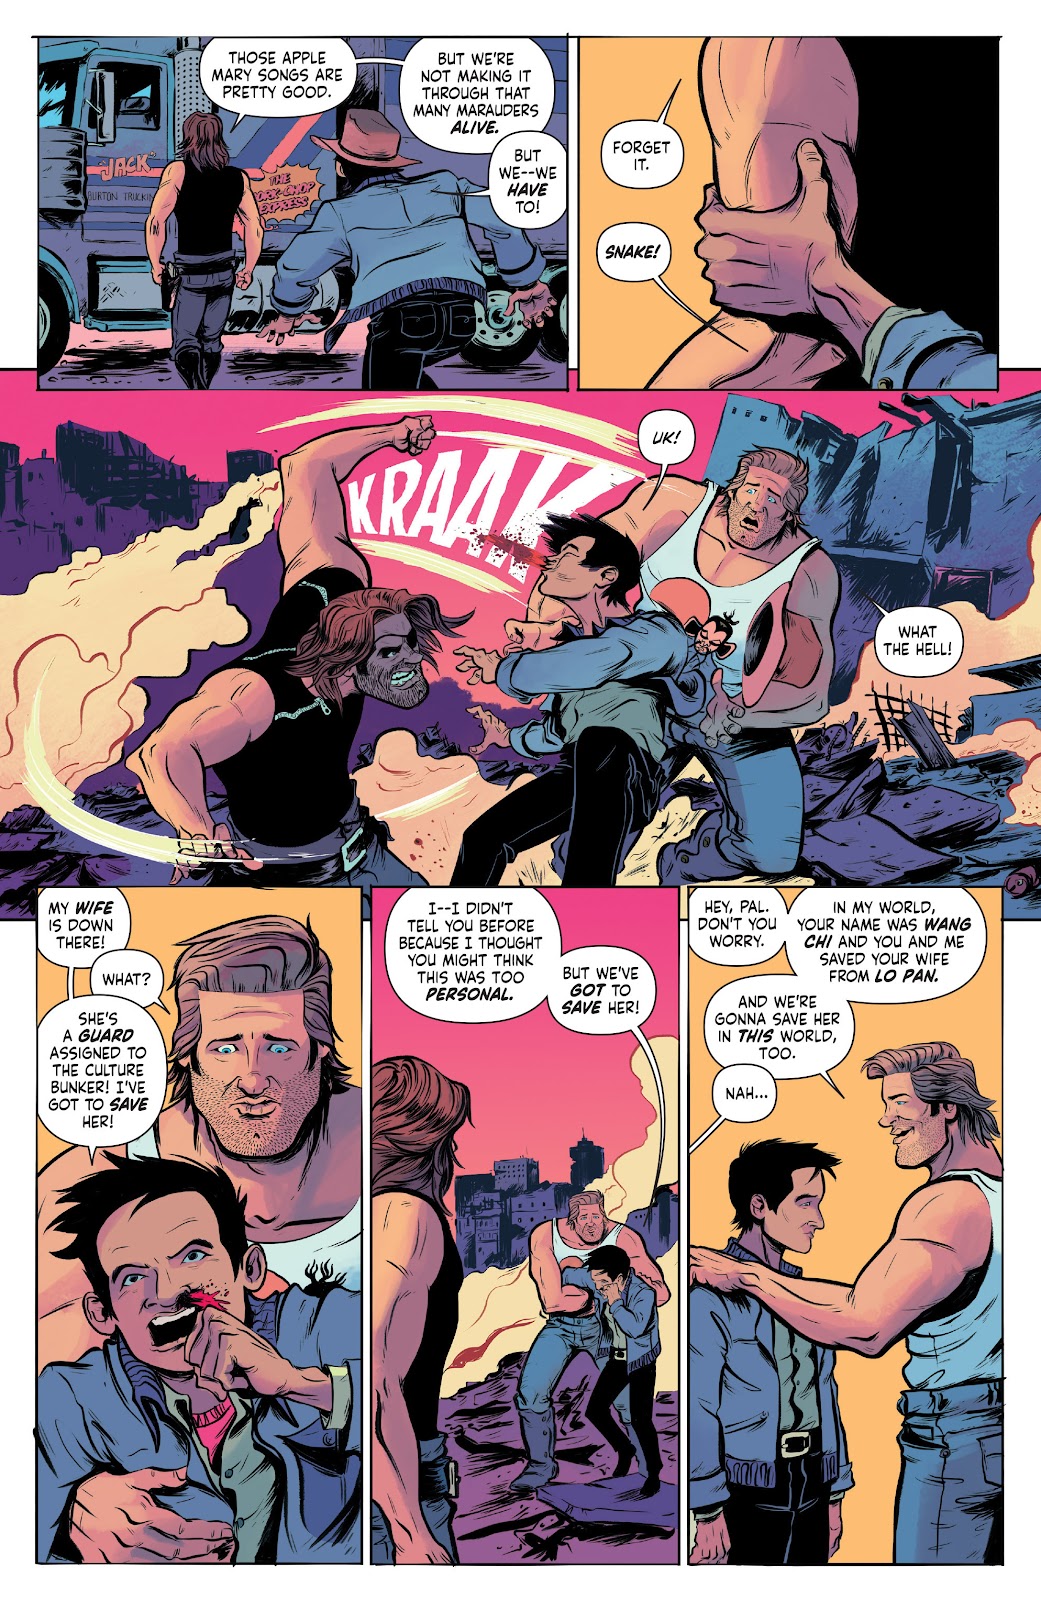 Big Trouble in Little China / Escape from New York issue 2 - Page 10